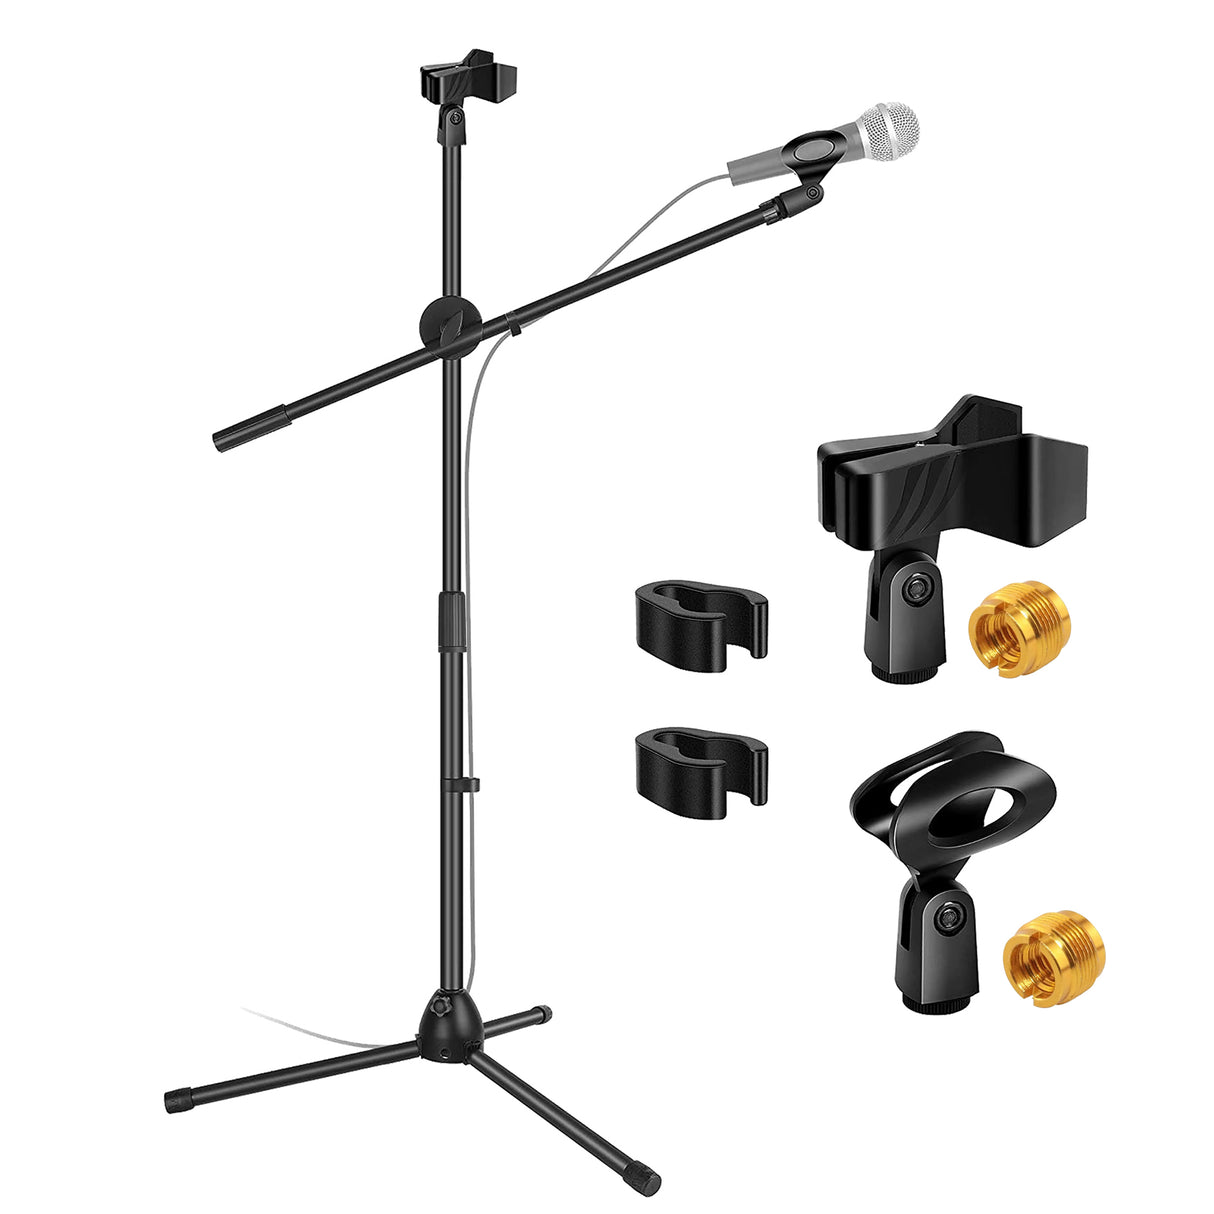 5 Core Dual Microphone Stand, Foldable Tripod Boom Stand On-Stage Stands Short Adjustable Mic Stand For Singing 360 Rotating with Dual Mic Clip Holders Heavy Duty MS DBL S